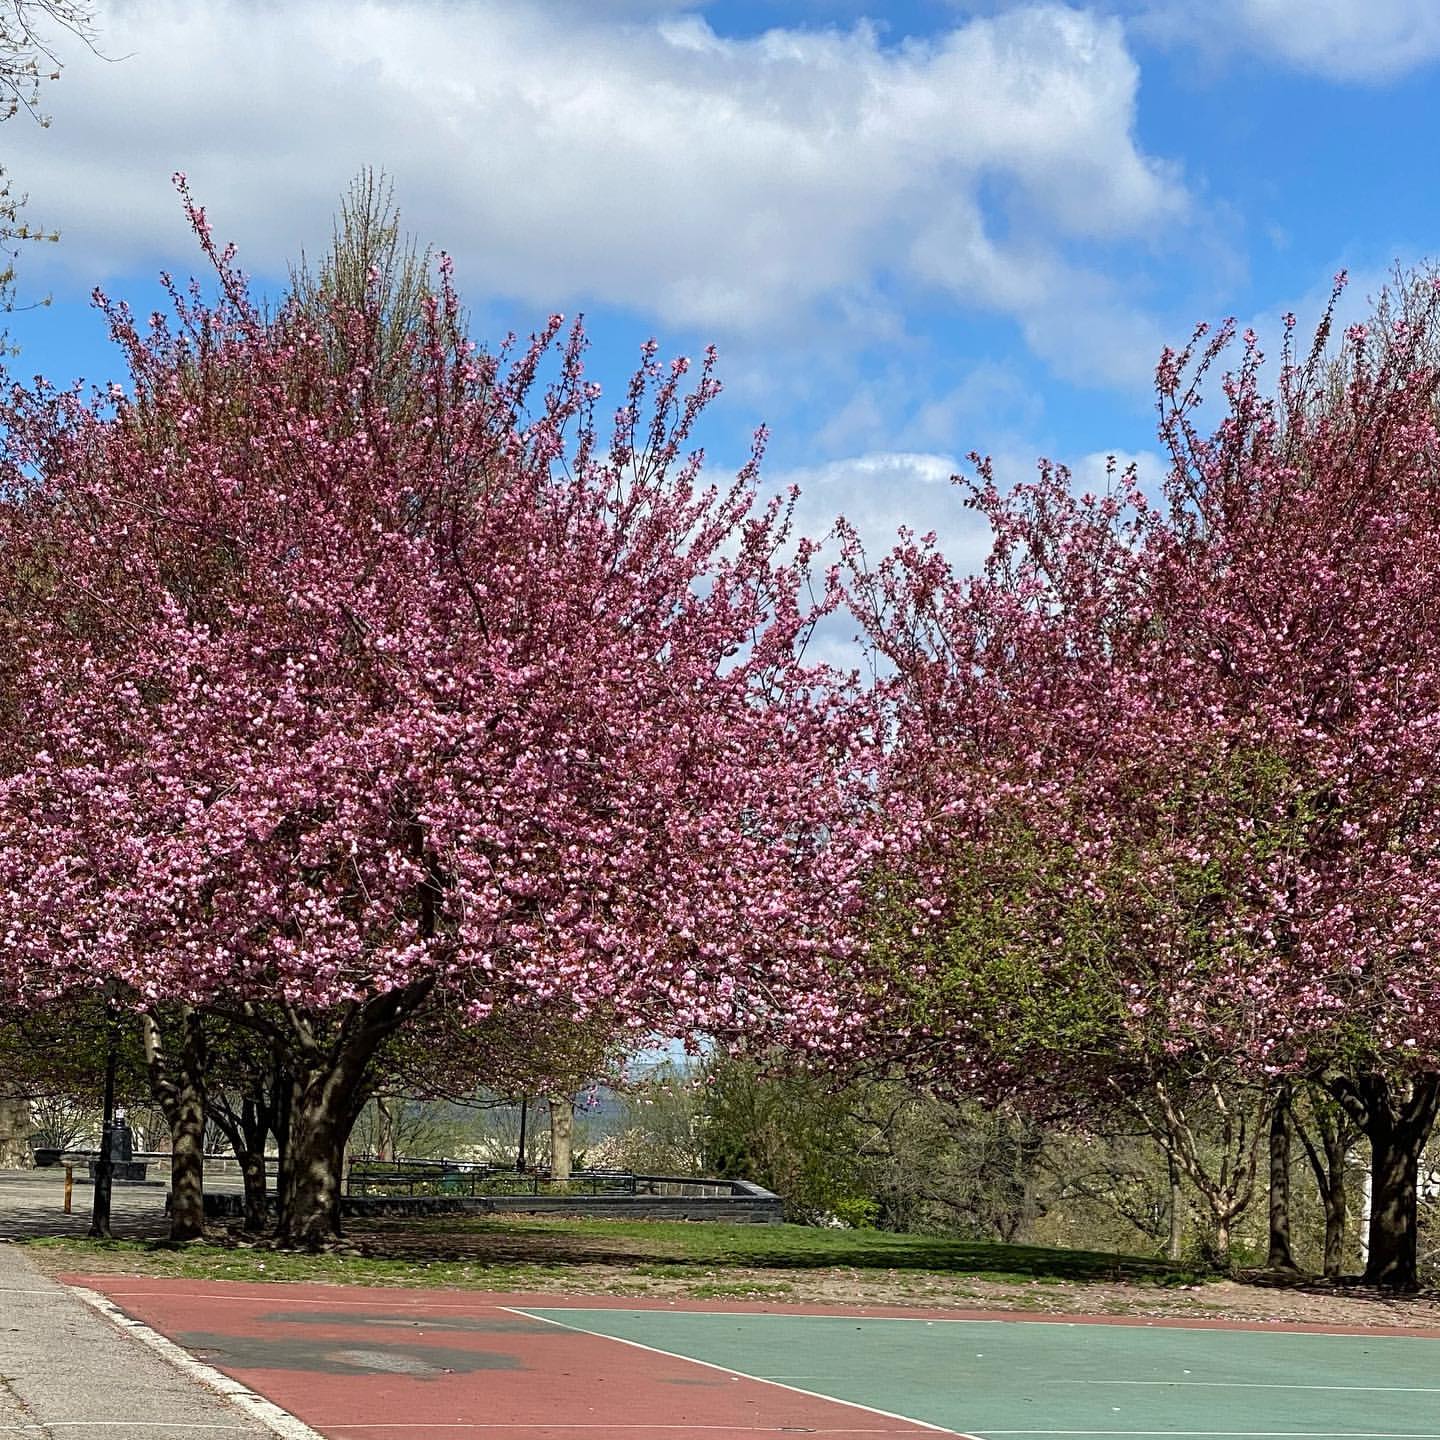 Two cherry blossom trees in full bloom, displaying vivid pink flowers, beside a basketball court under a clear sky with fluffy clouds.